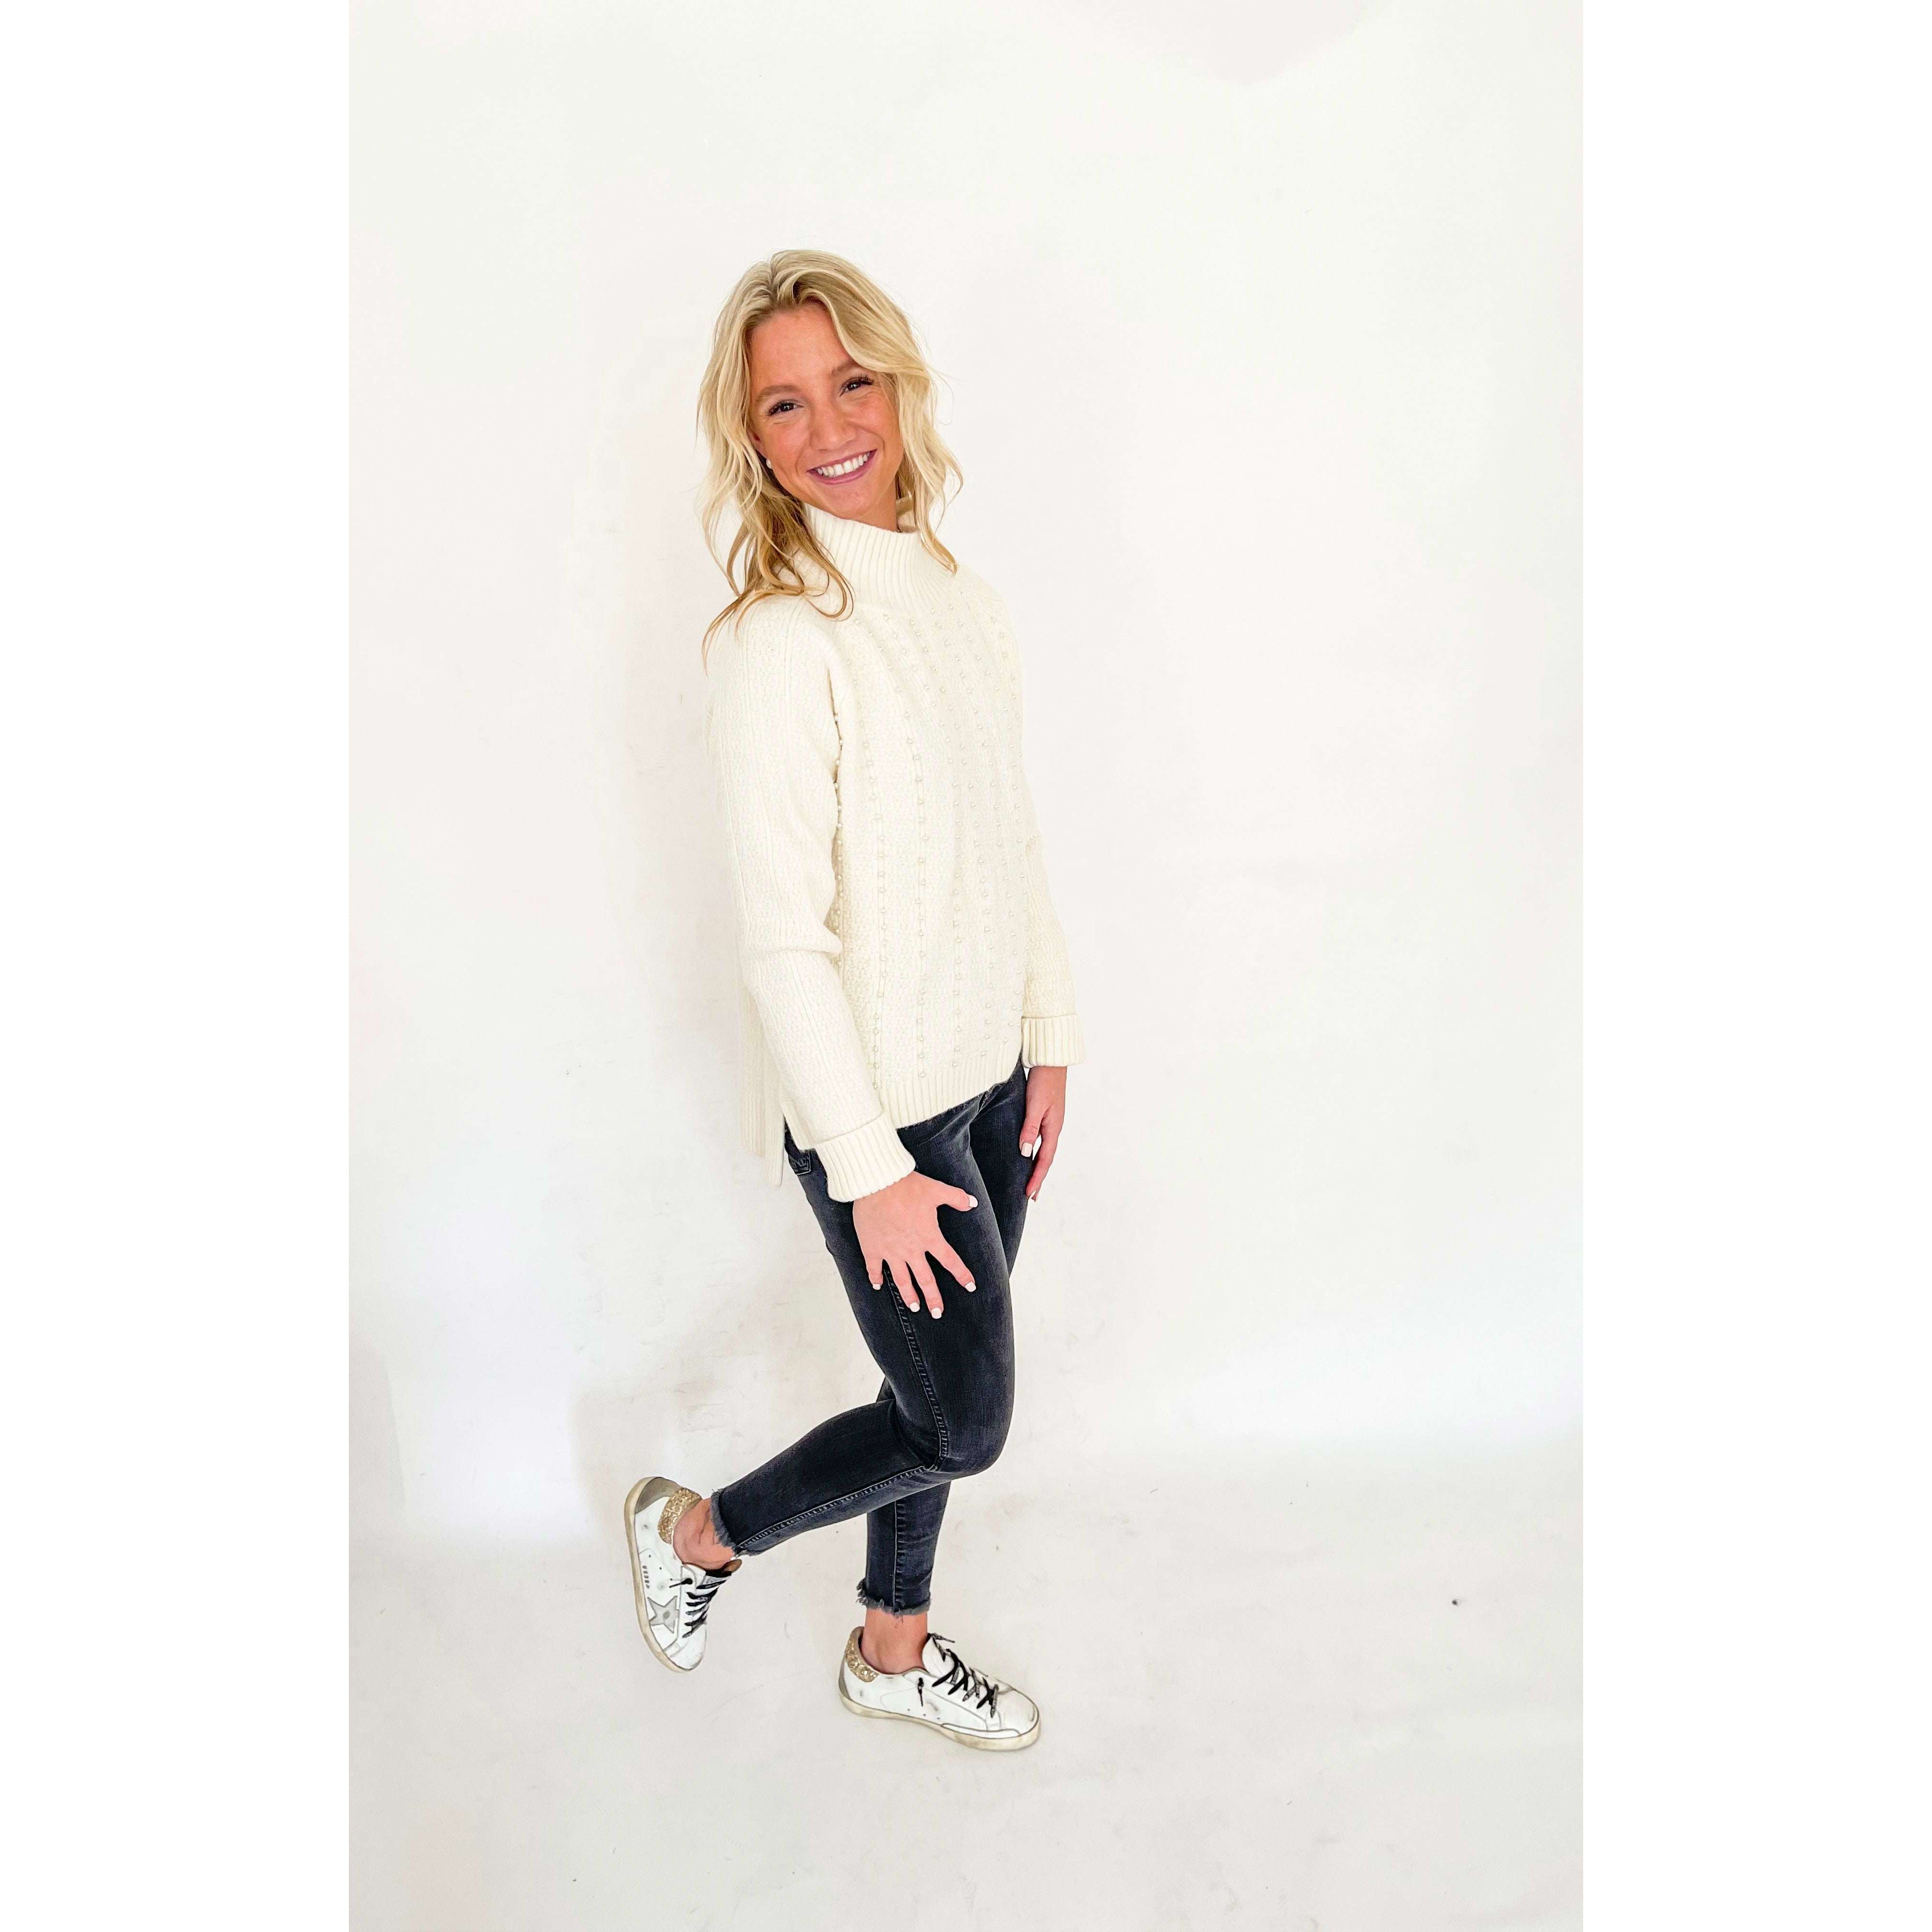 8.28 Boutique:Karlie Clothes,Karlie Clothes Pearl Mock Neck Sweater,Sweaters